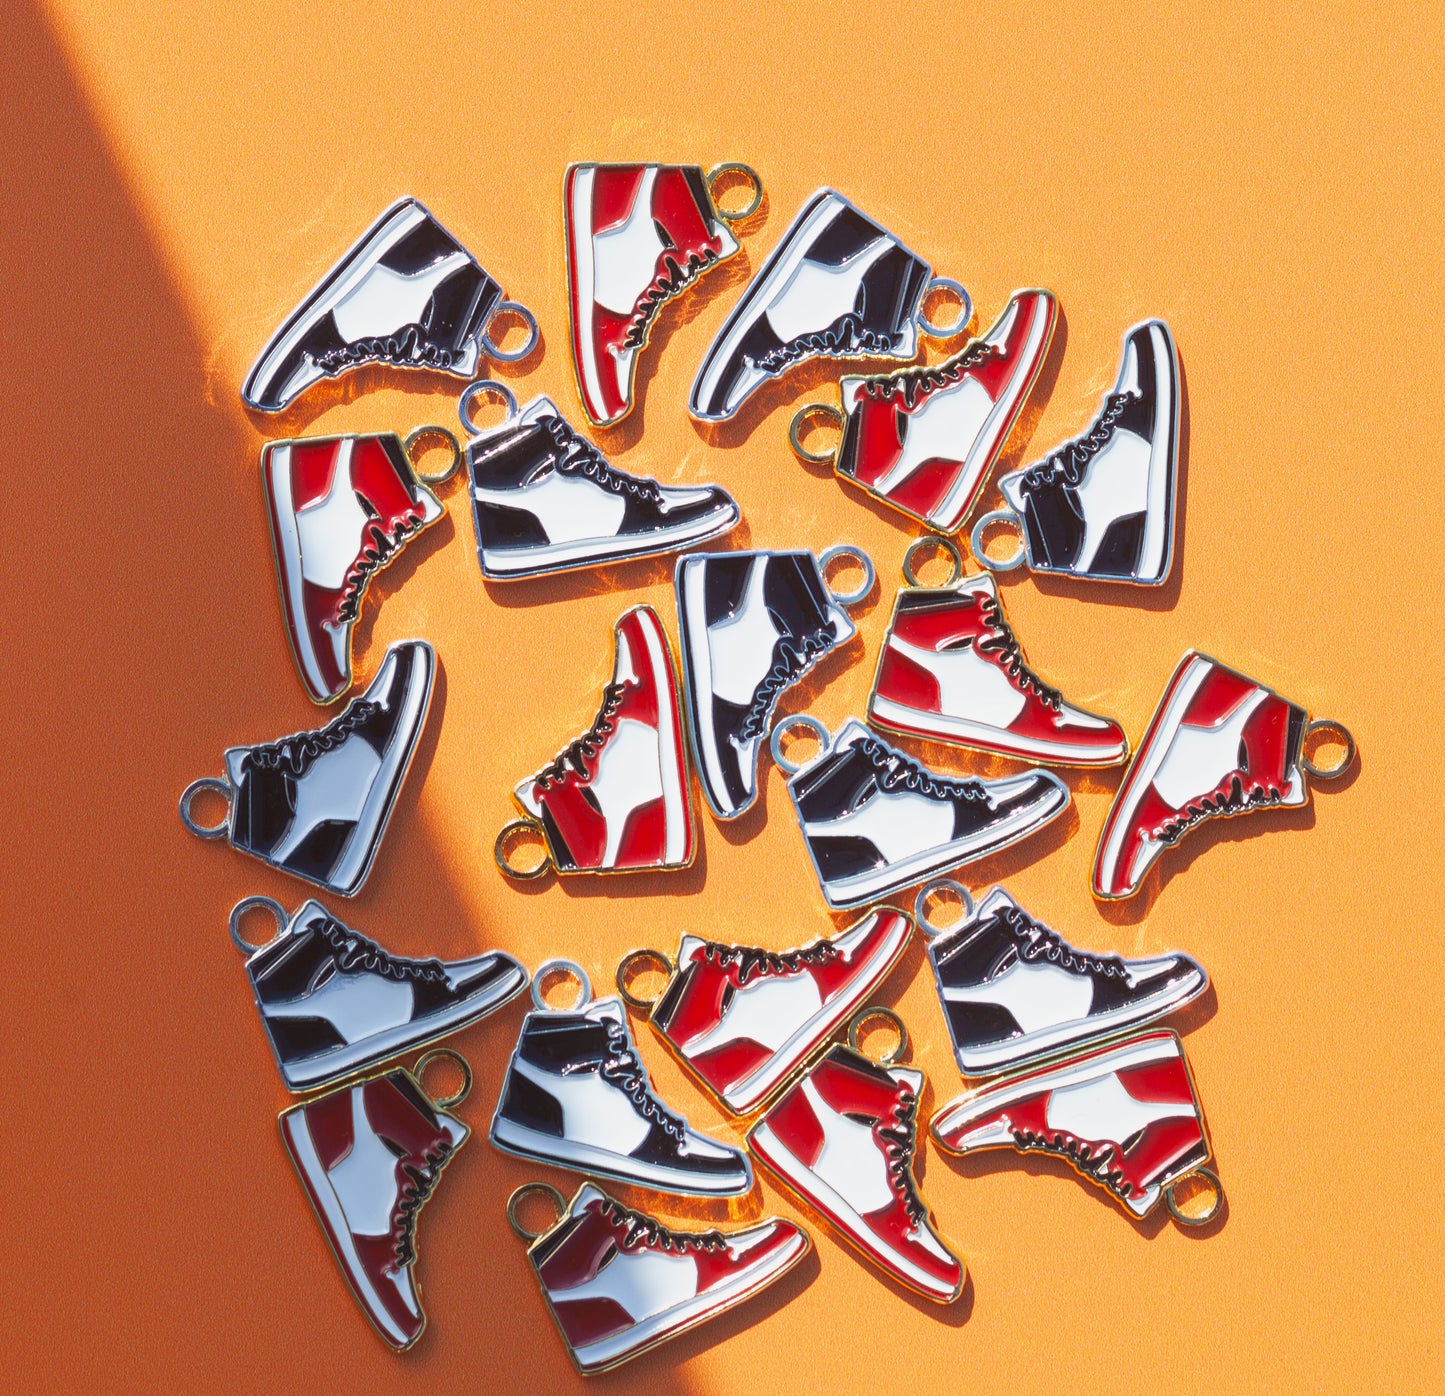 SNEAKER GIRL MOBB CHARMS™-RED